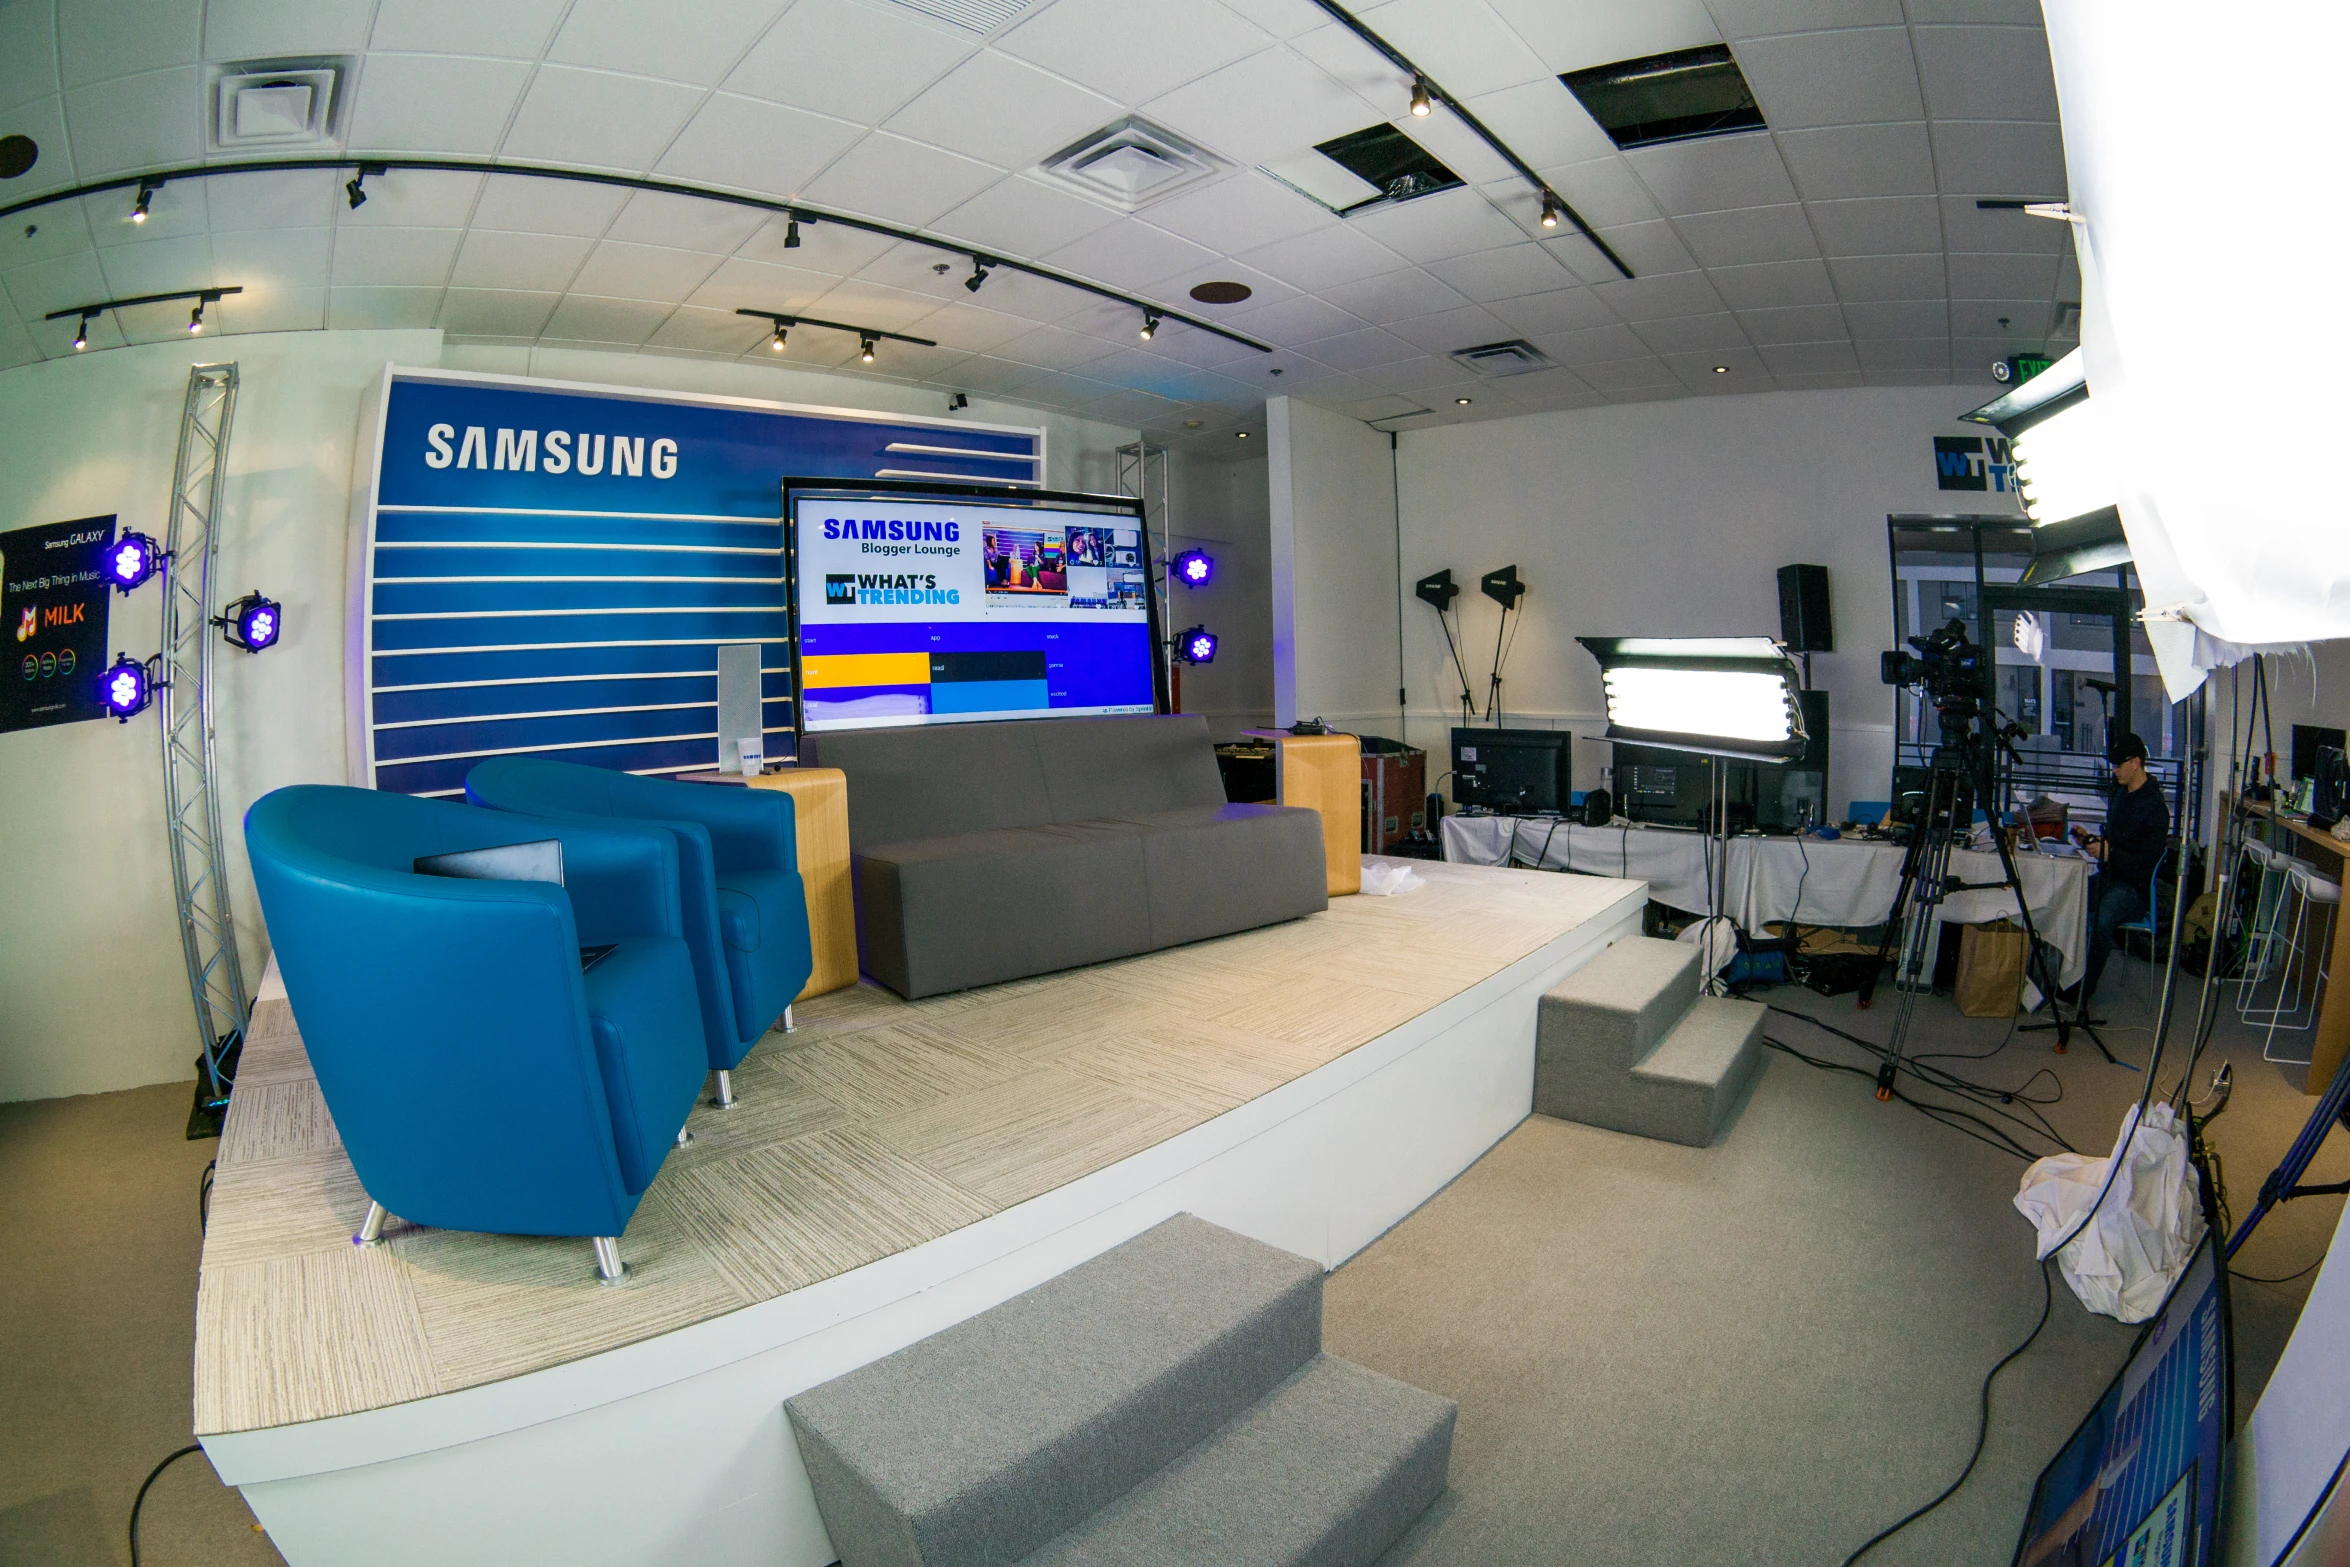 this is a virtual image of the inside of a television studio